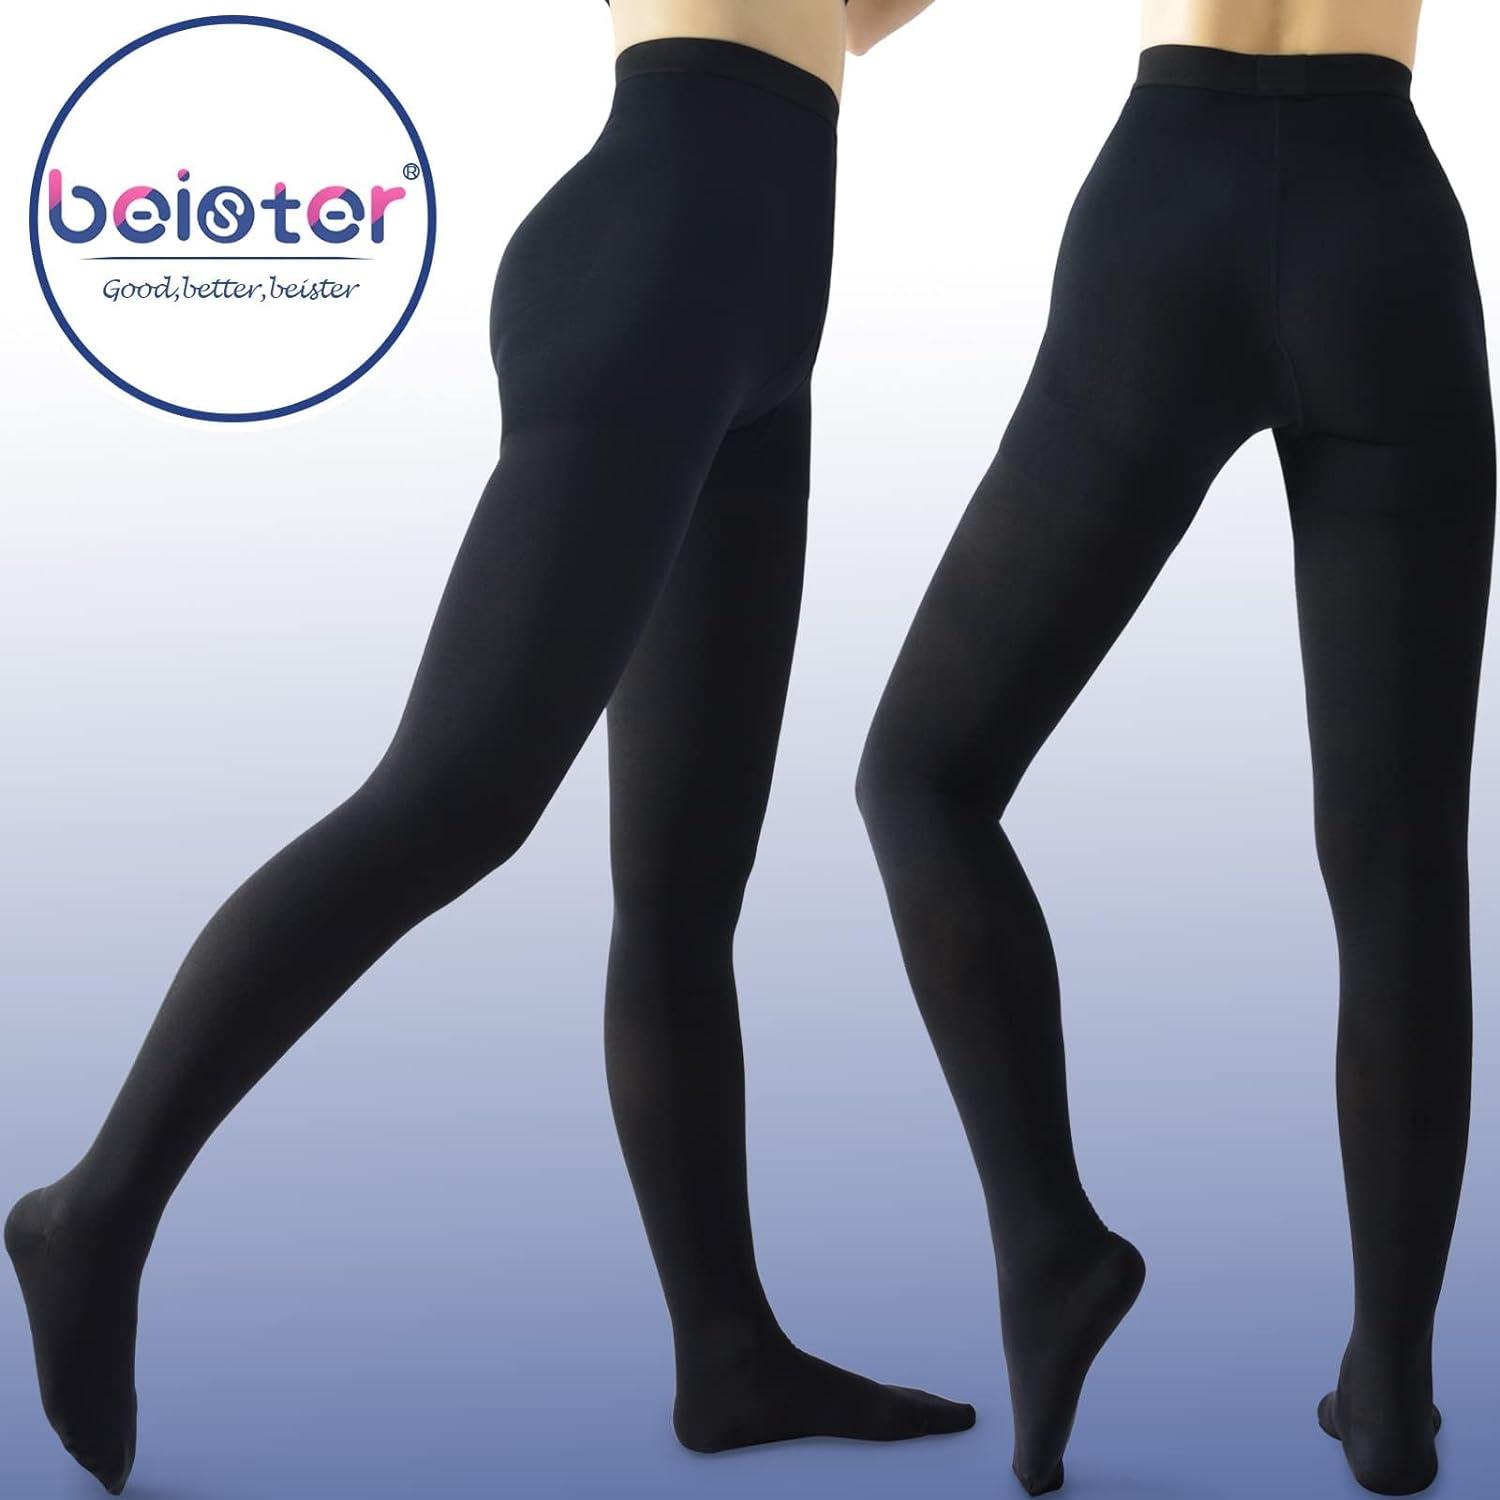  Medical Compression Tights by Beister, 20-30 mmHg Thin Footless  Graduated Support Pantyhose for Women & Men, High Waist Circulation Compression  Leggings for Varicose Veins, Edema, DVT, Leg Pain : Health 